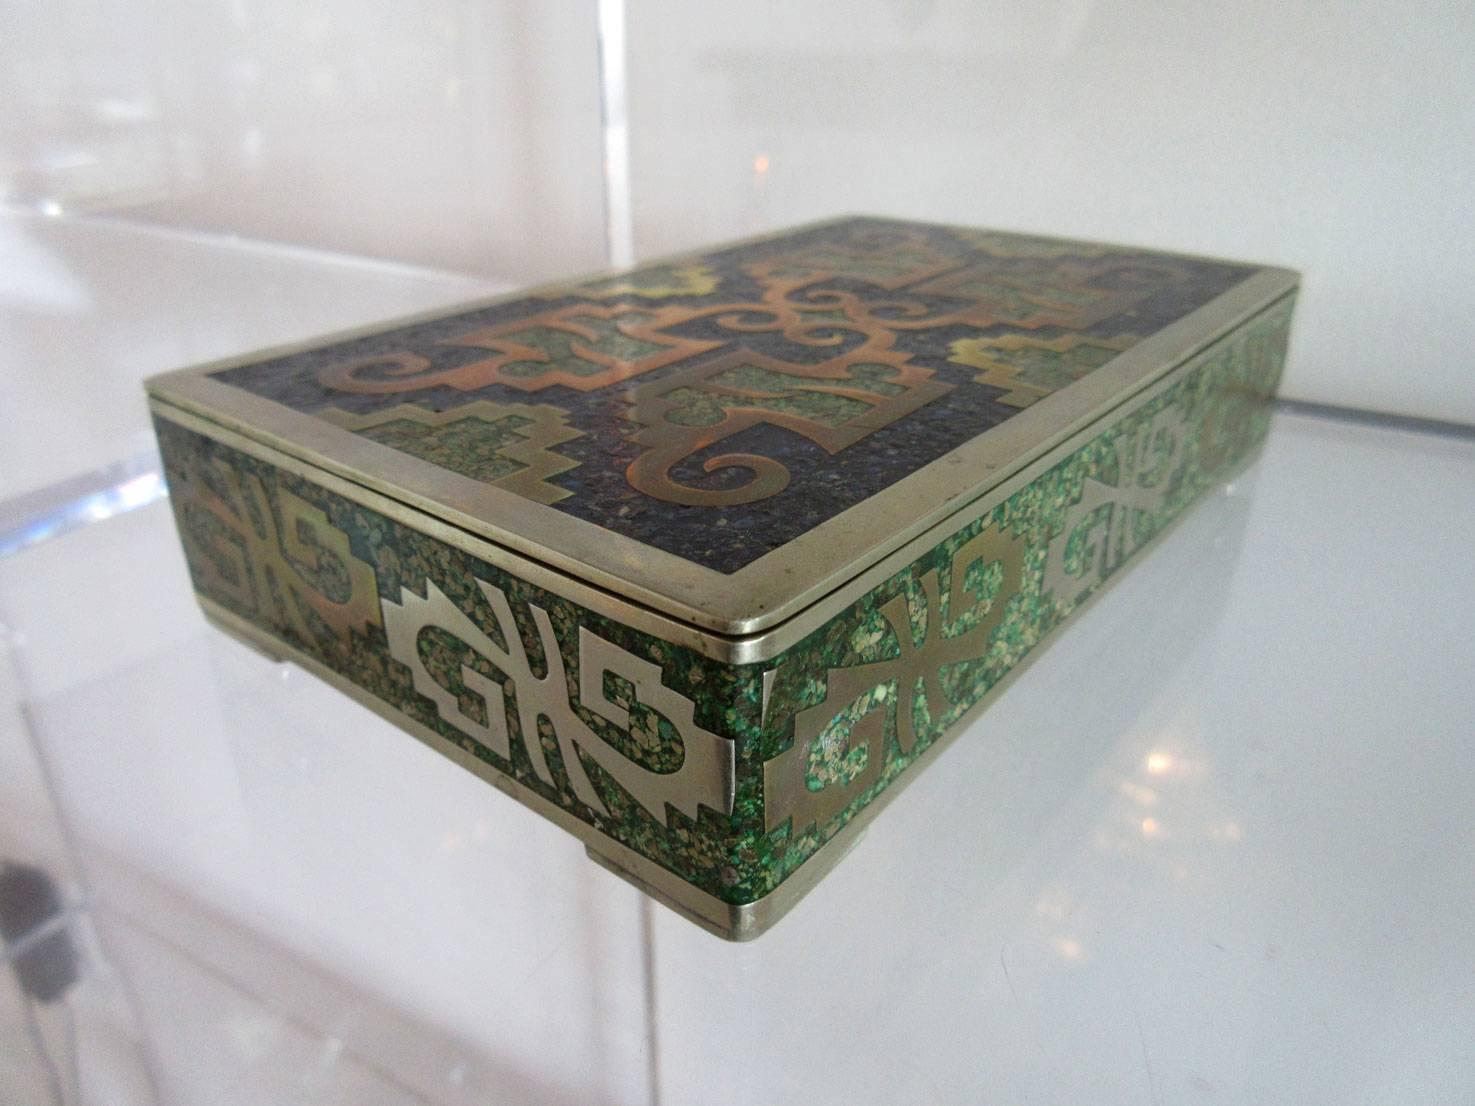 Vintage mixed metal Mexican box with wood interior. The box is inlaid with stone, making an ornate 